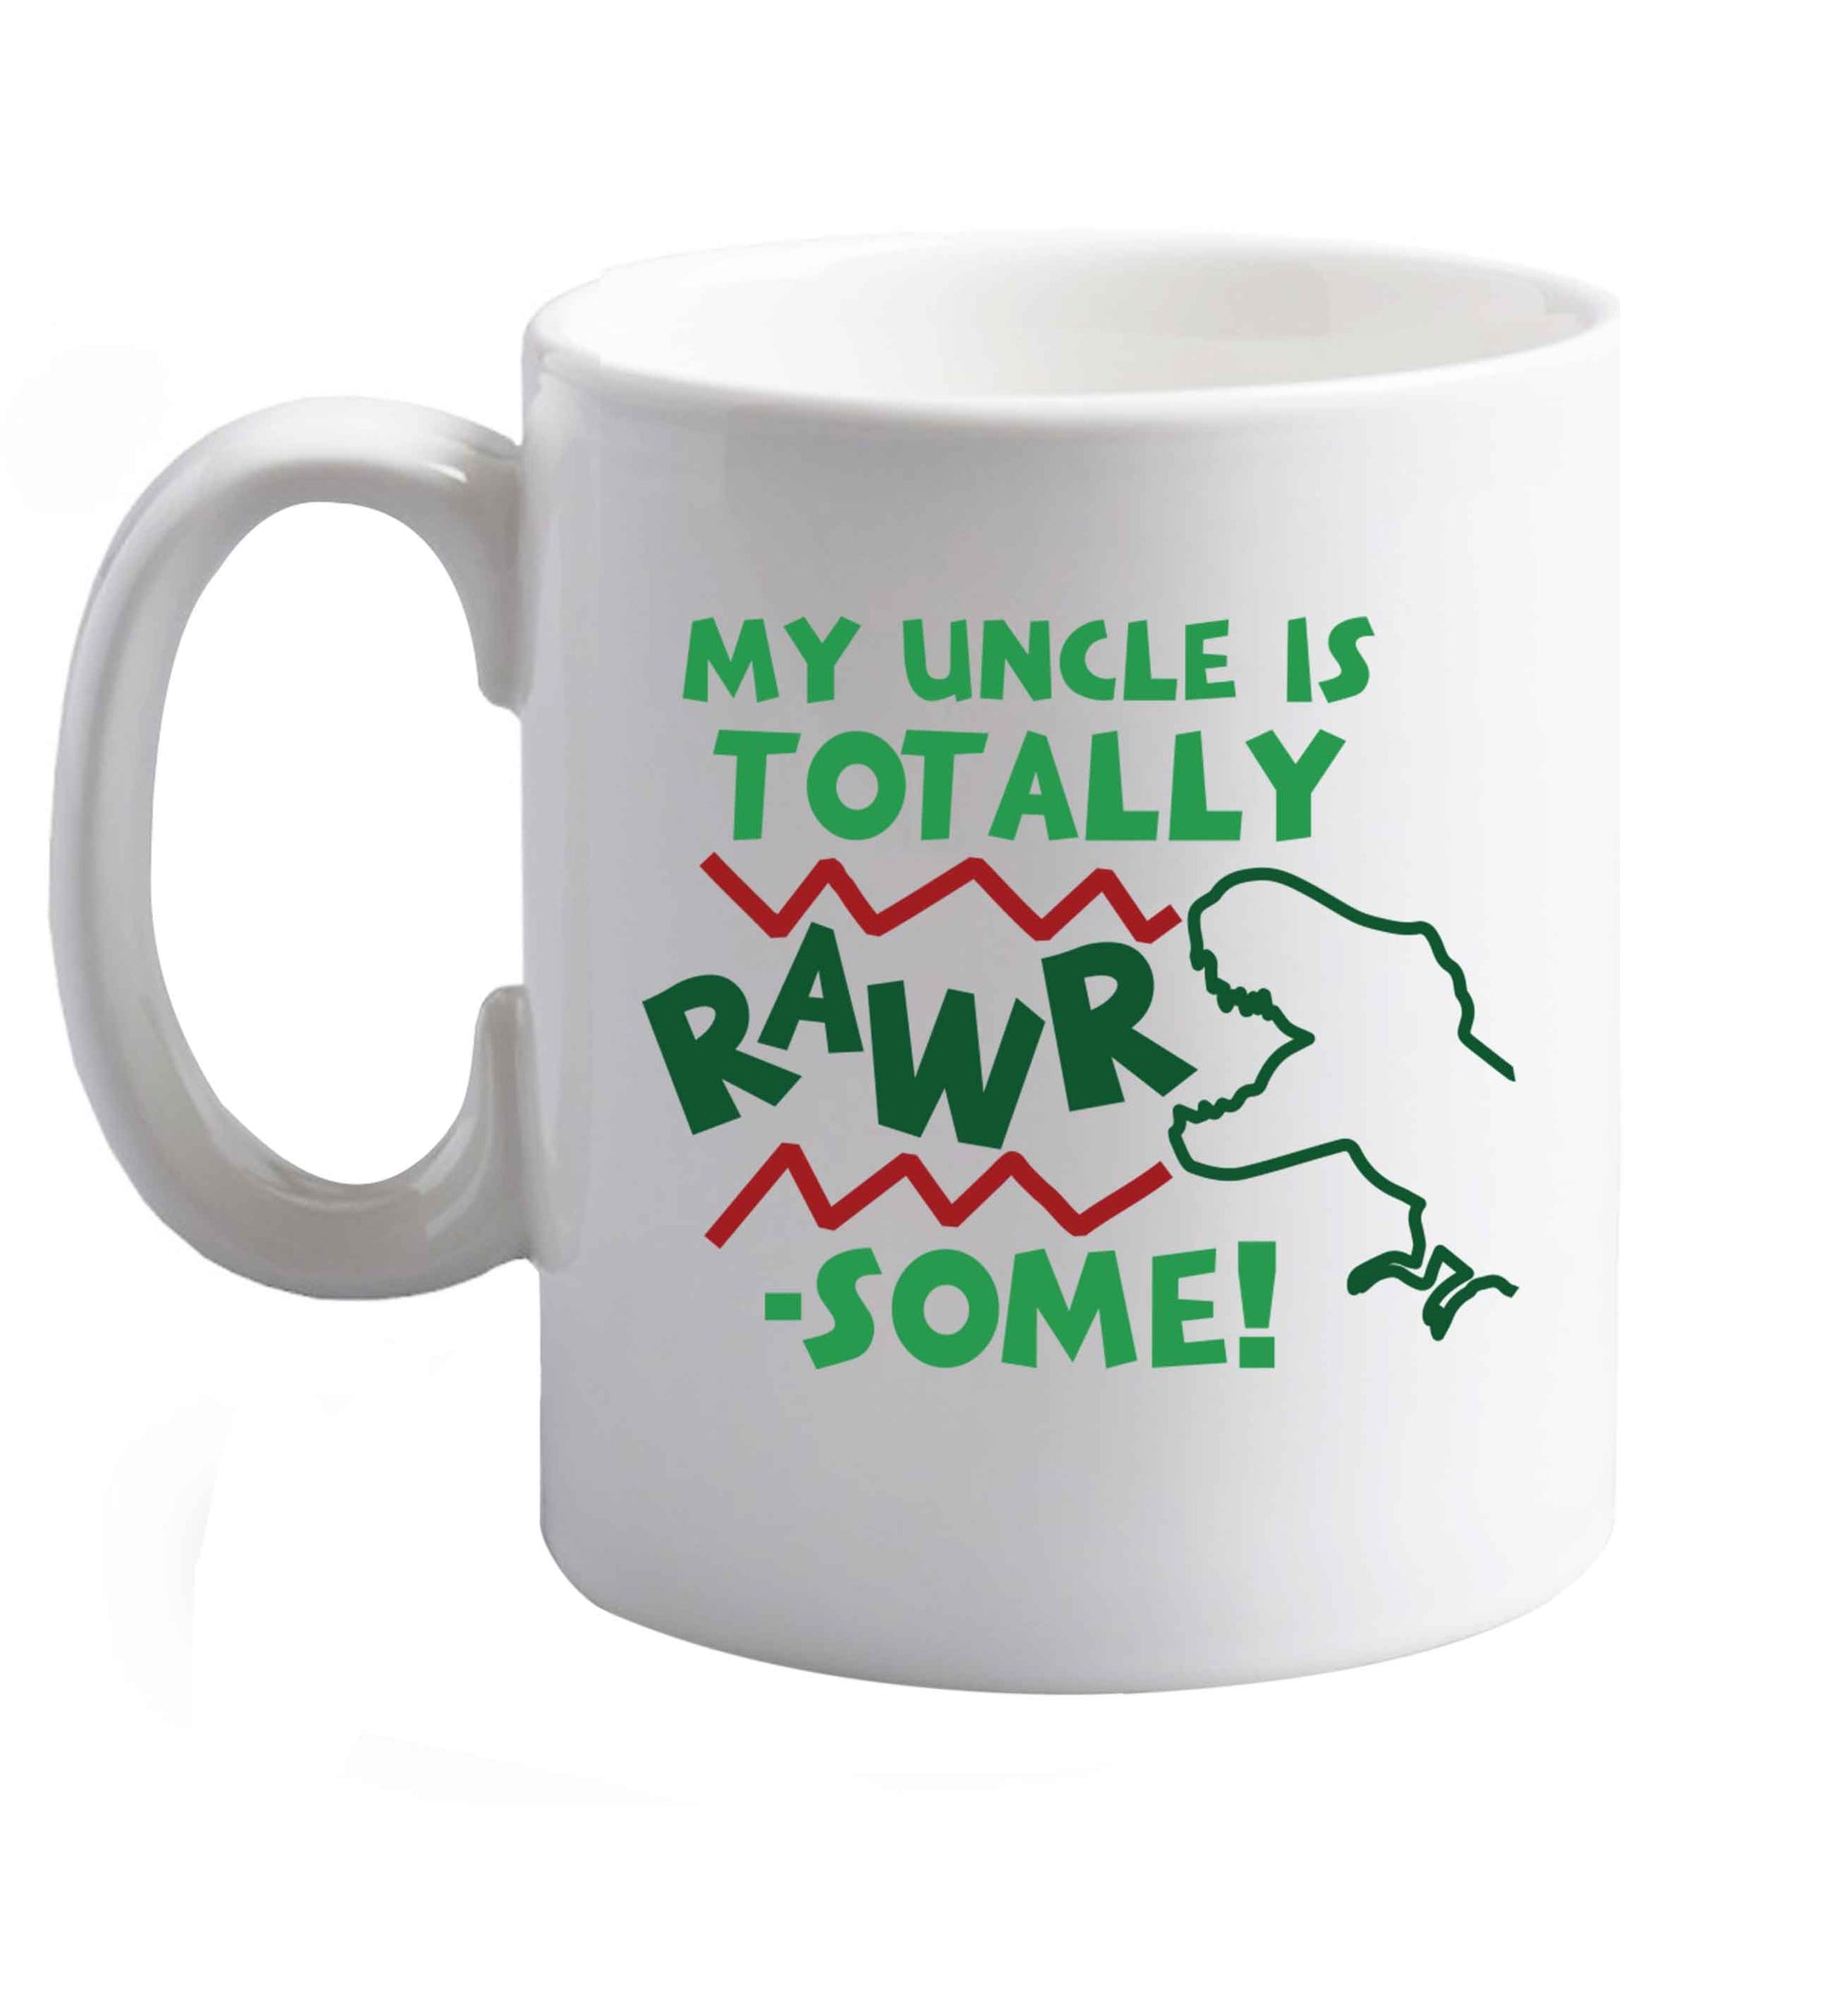 10 oz My uncle is totally rawrsome ceramic mug right handed